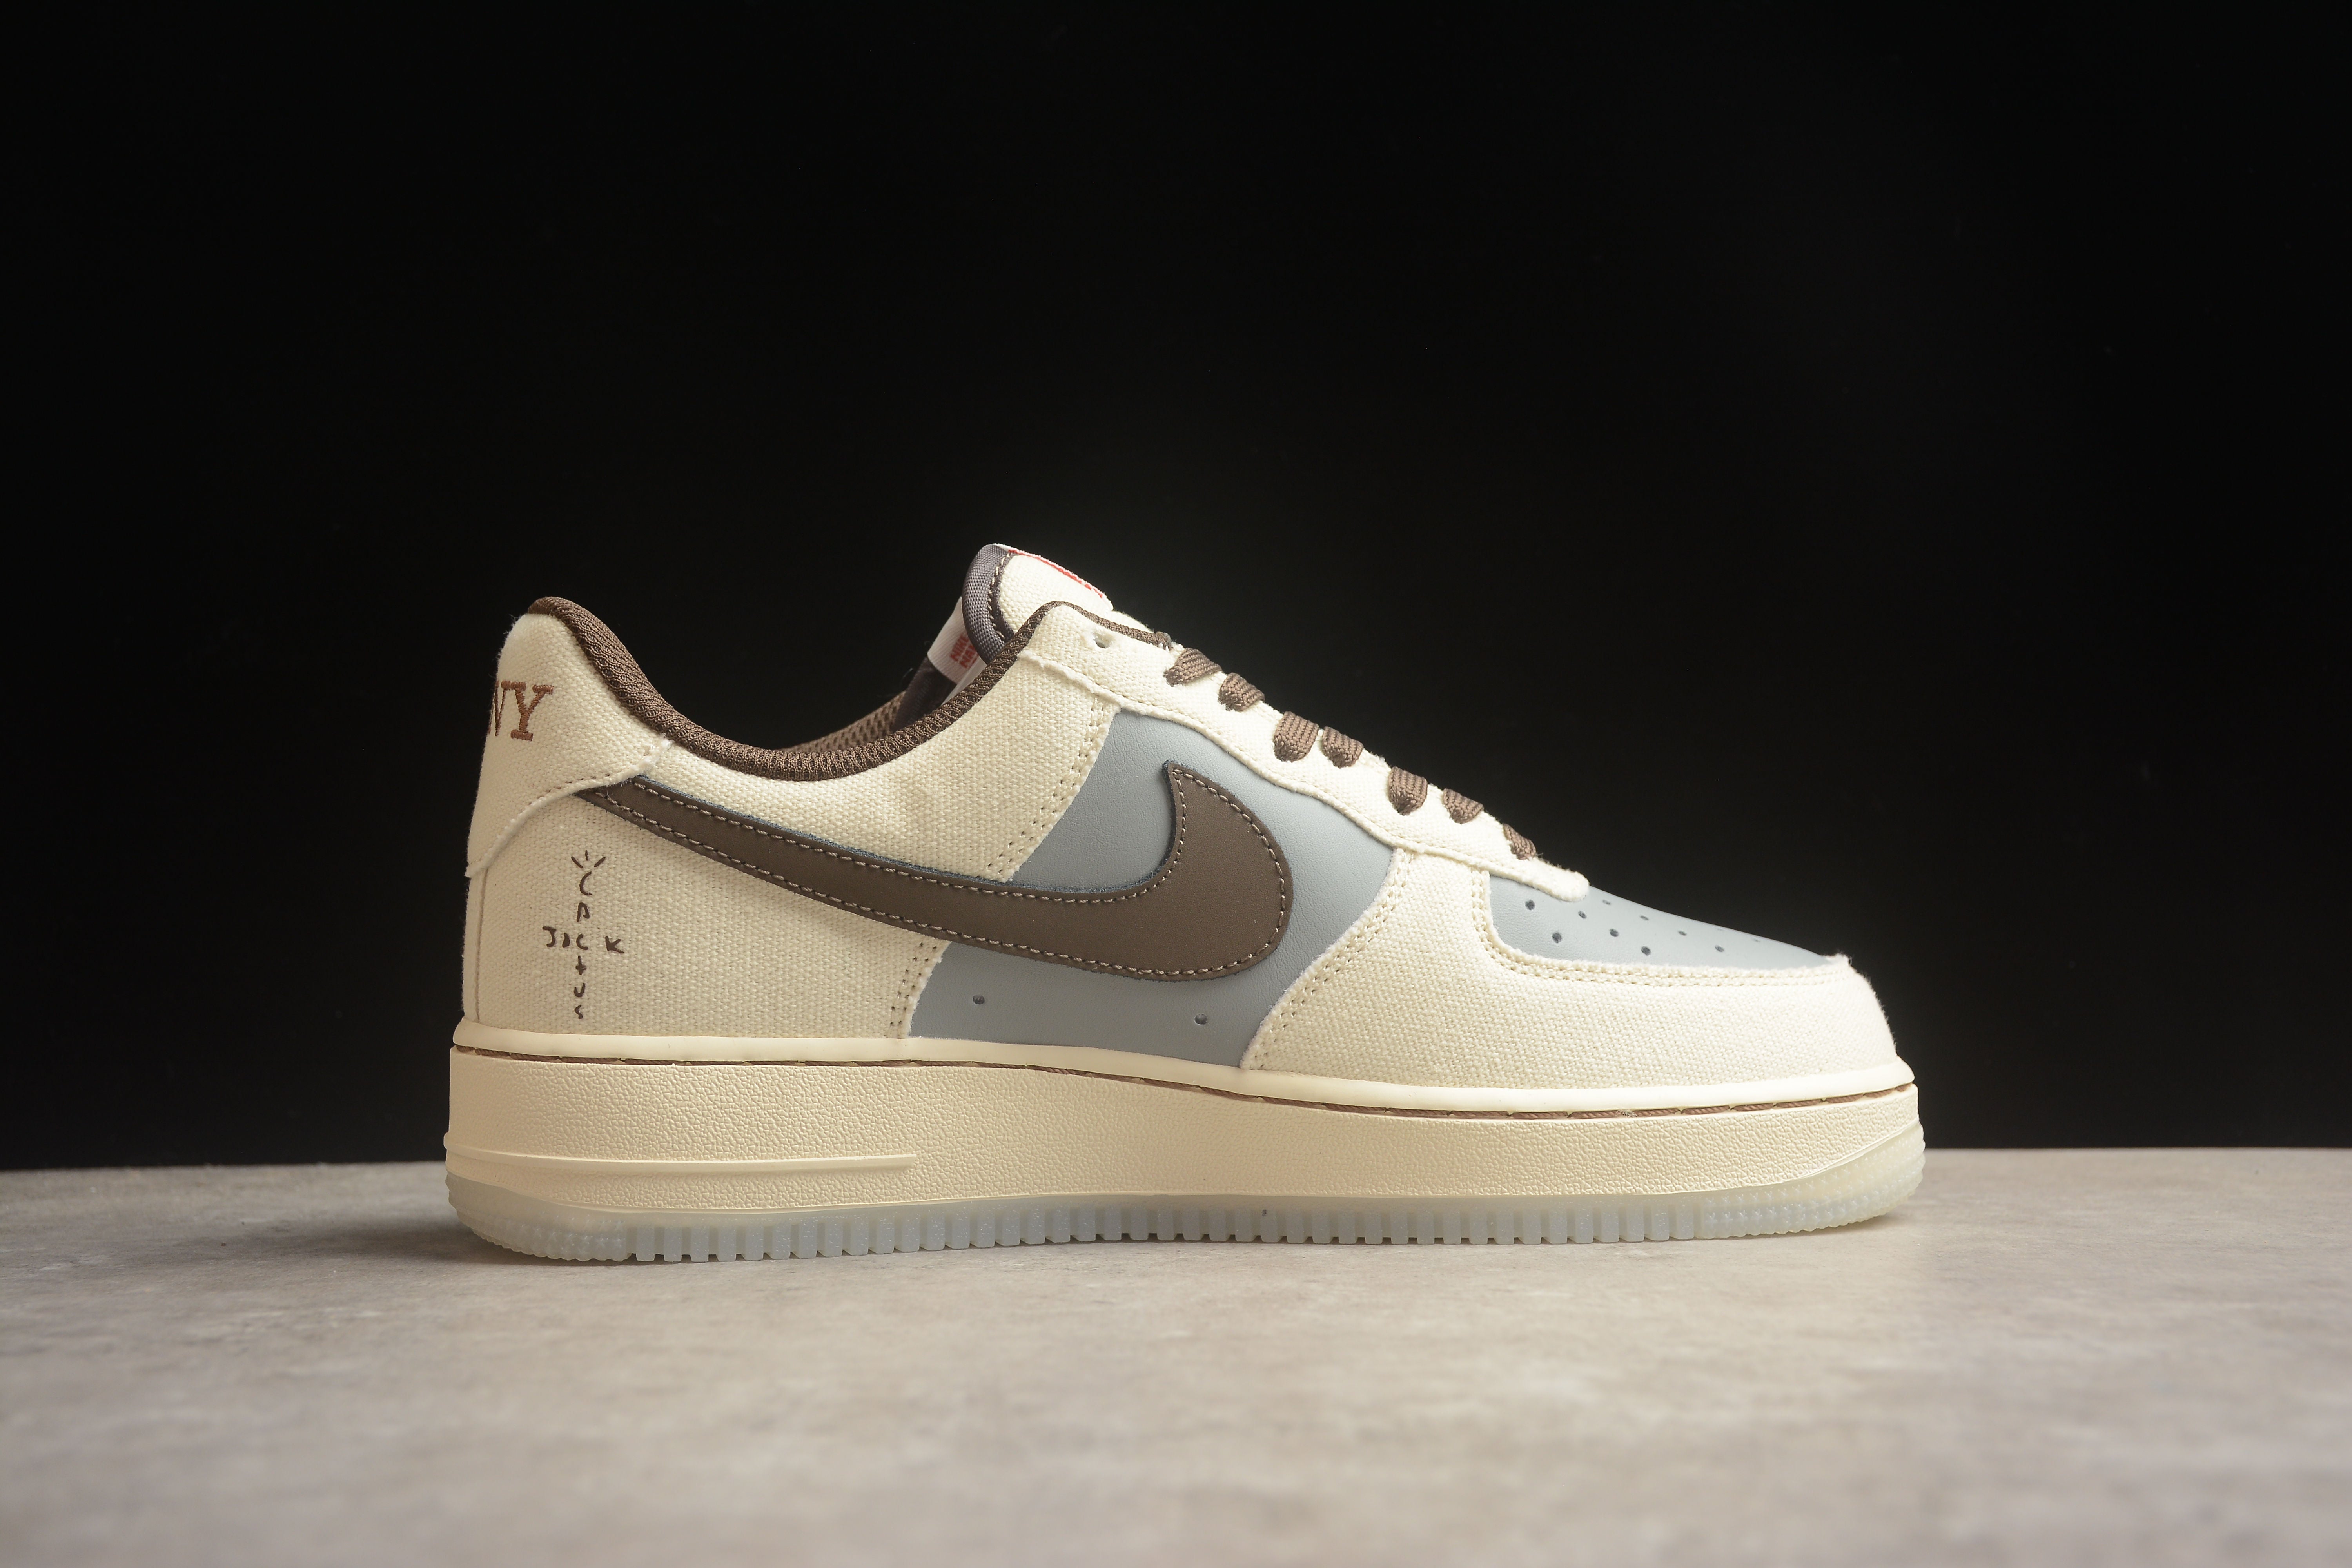 Nike airforce A1 play station  shoes